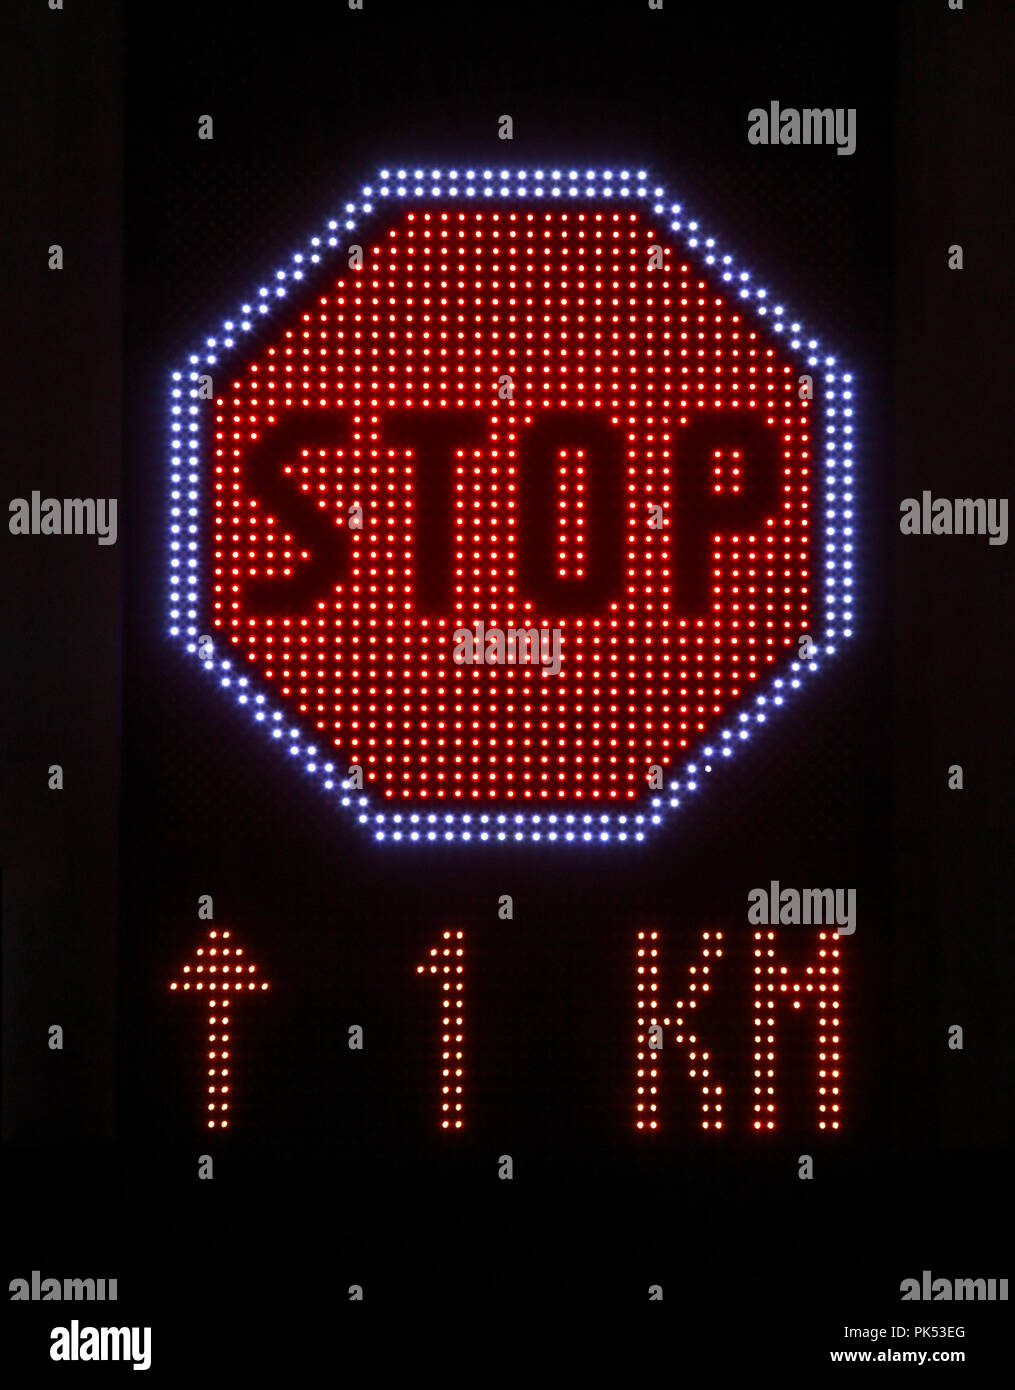 LED lights stop sign with message lights Stock Photo